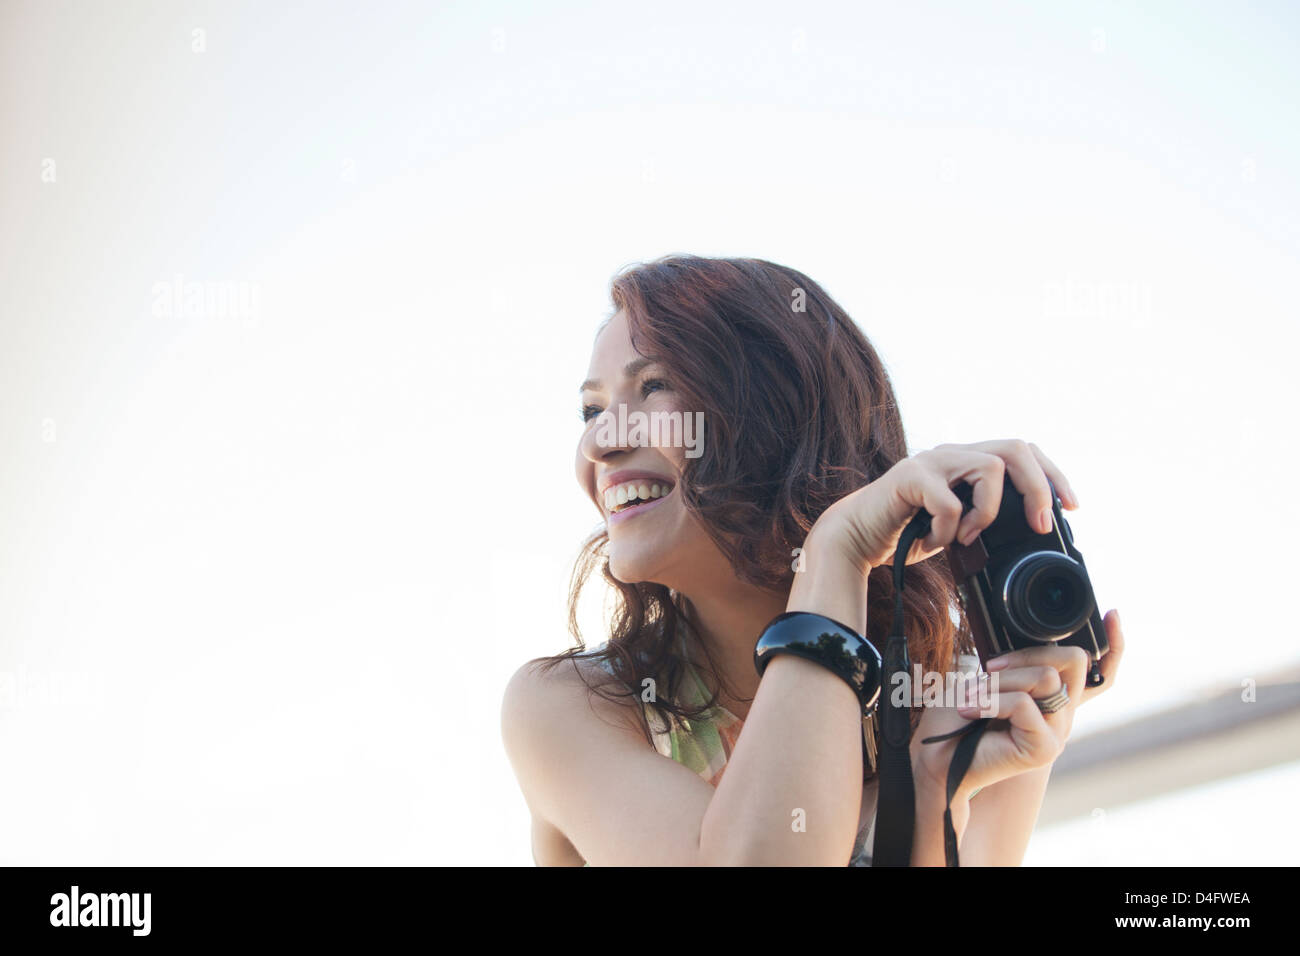 Smiling woman taking pictures outdoors Stock Photo